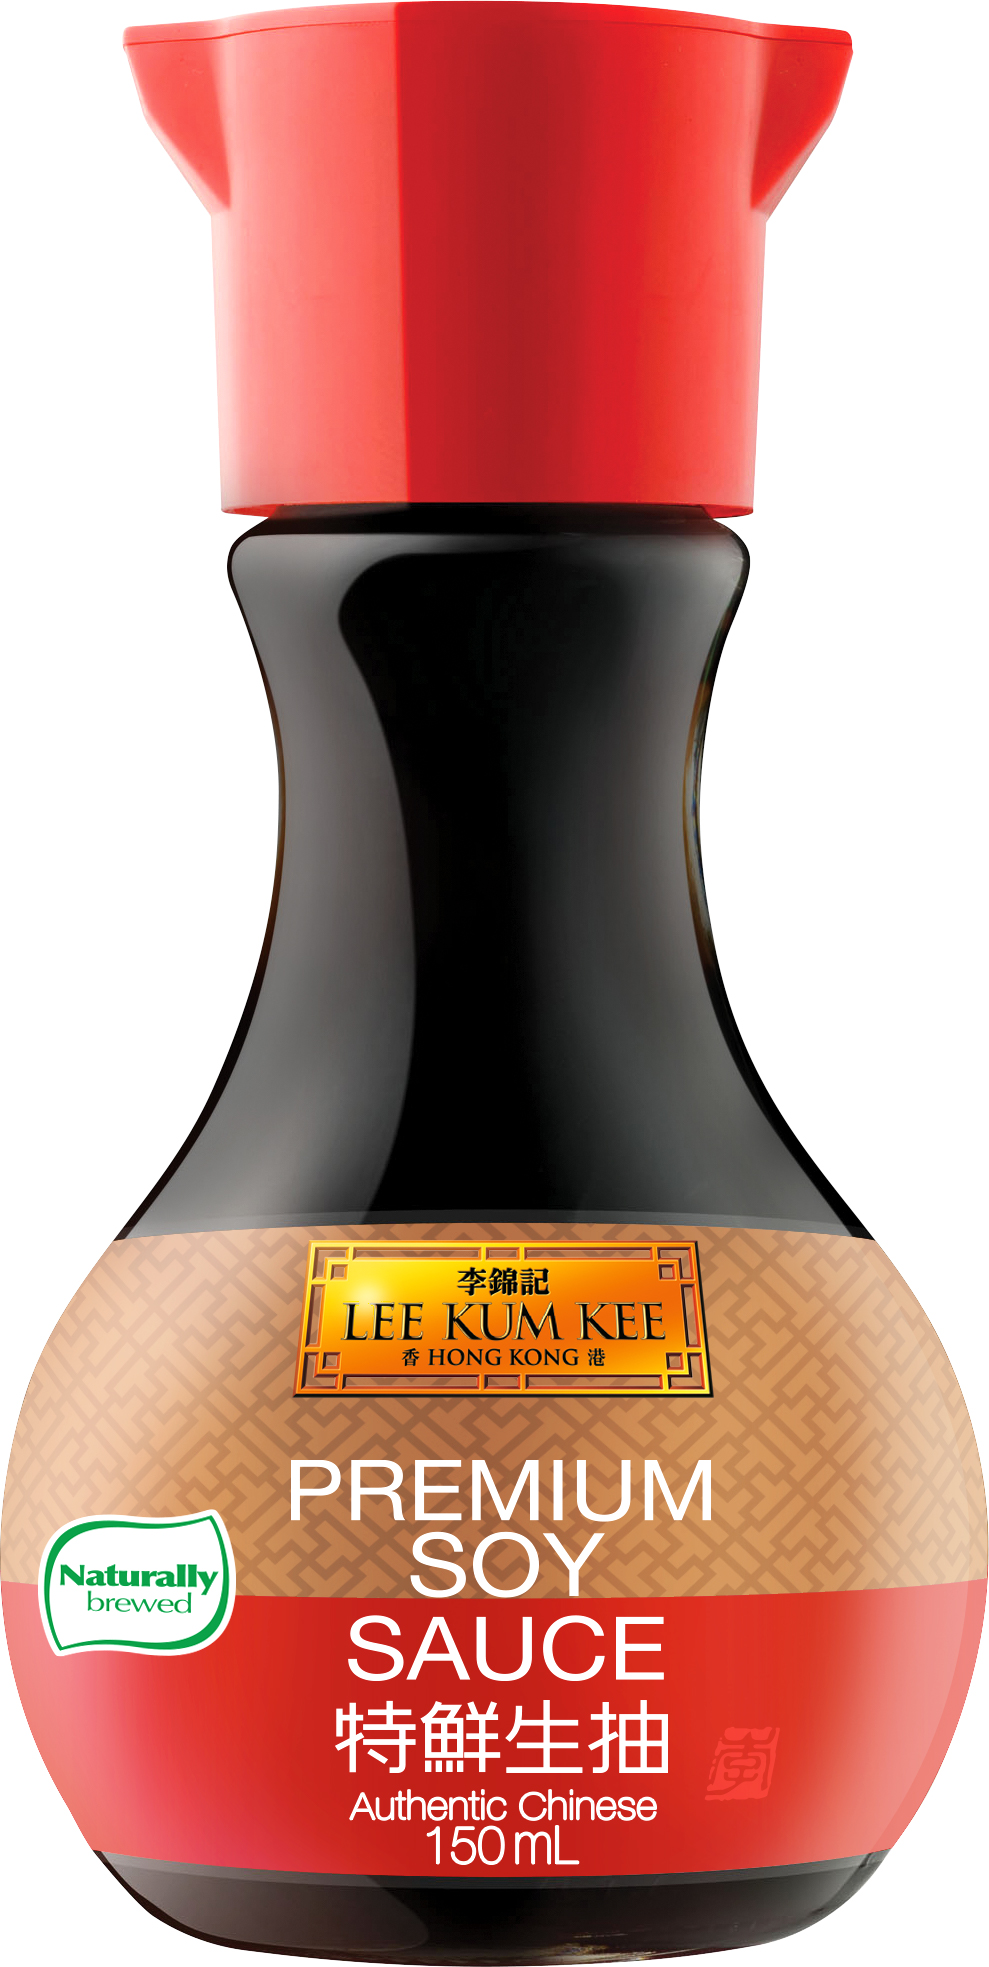 Premium Soy Sauce 150 ml naturally brewed icon